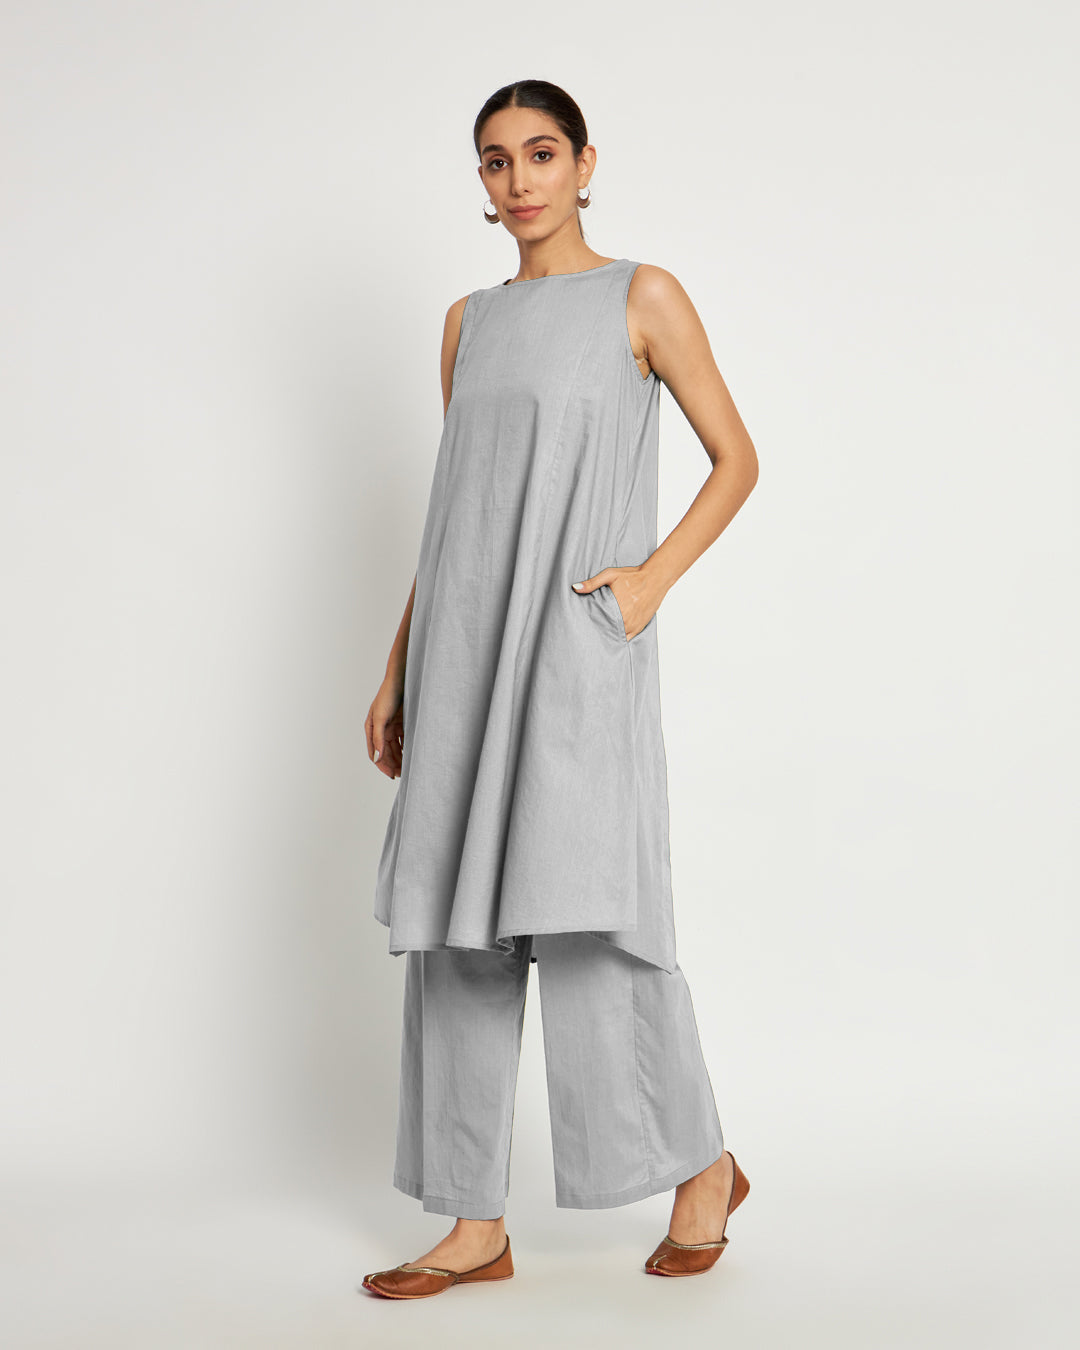 Iced Grey Sleeveless A-Line Solid Co-ord Set